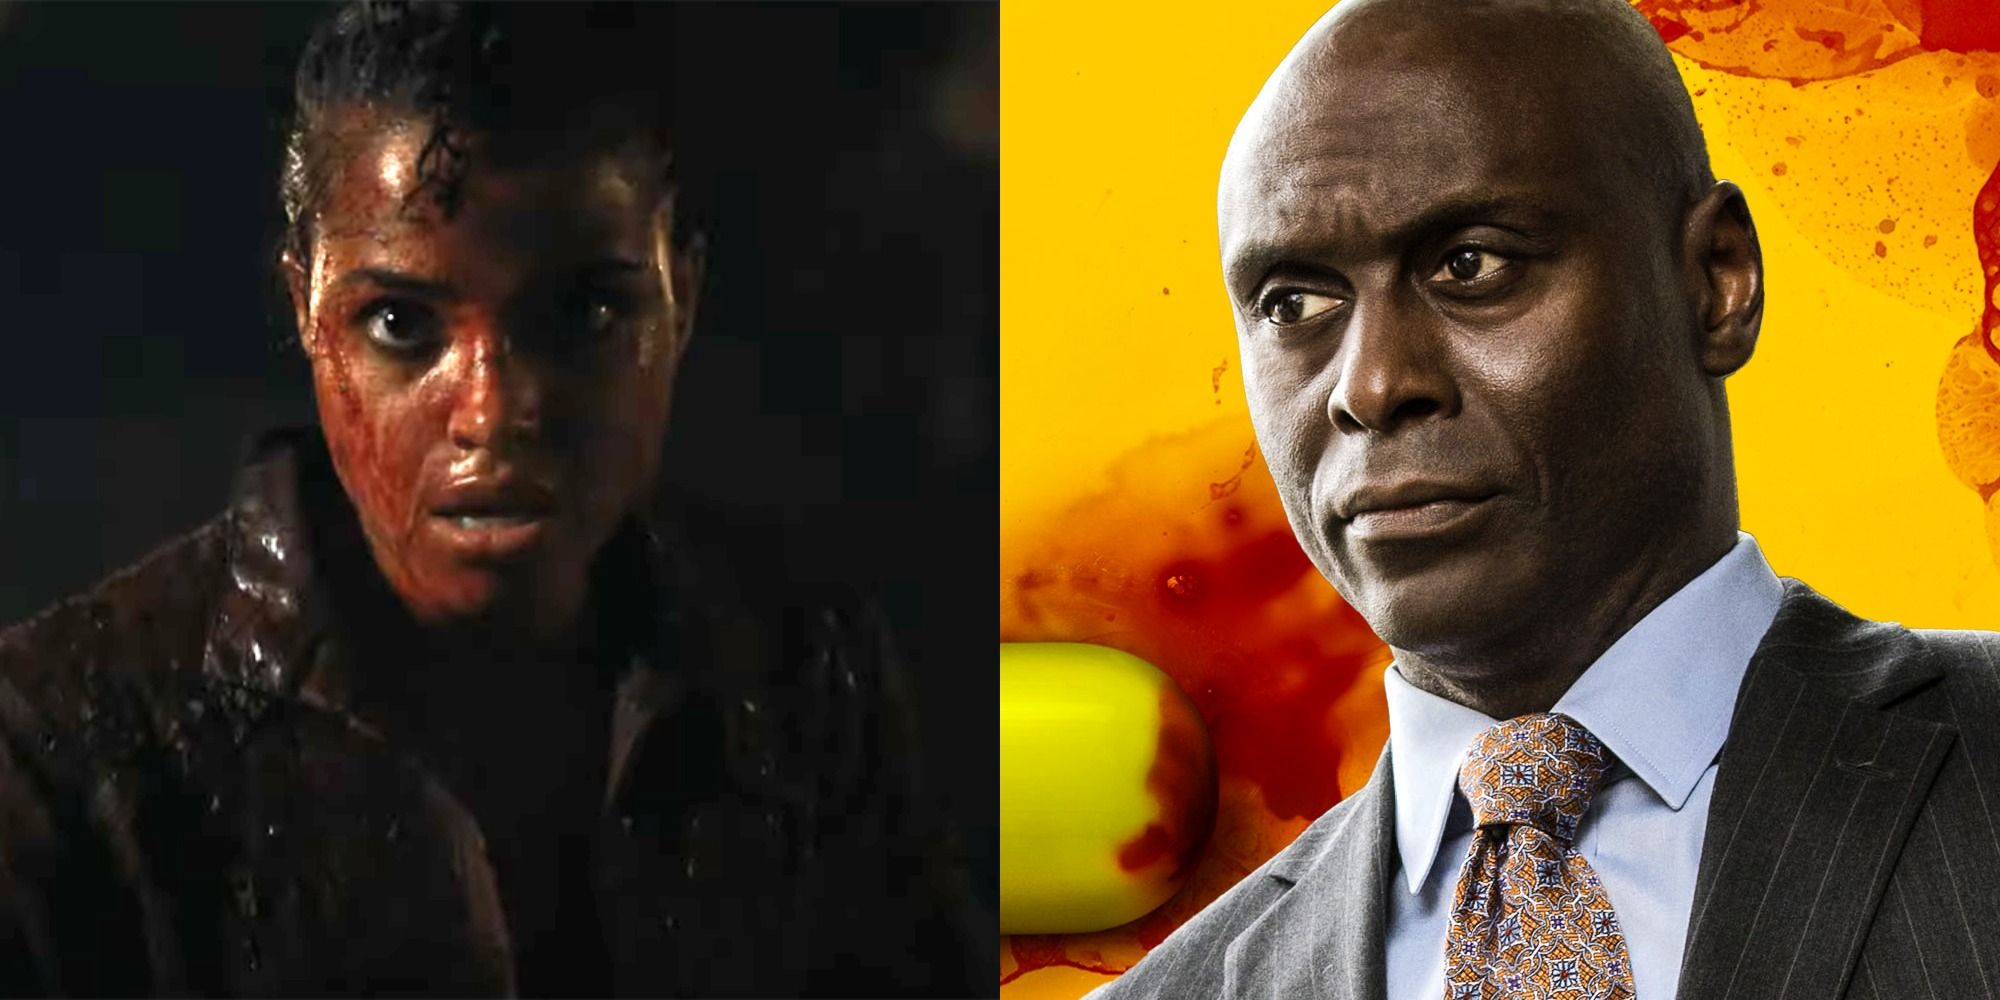 A split image of actors from the Netflix Resident Evil movie